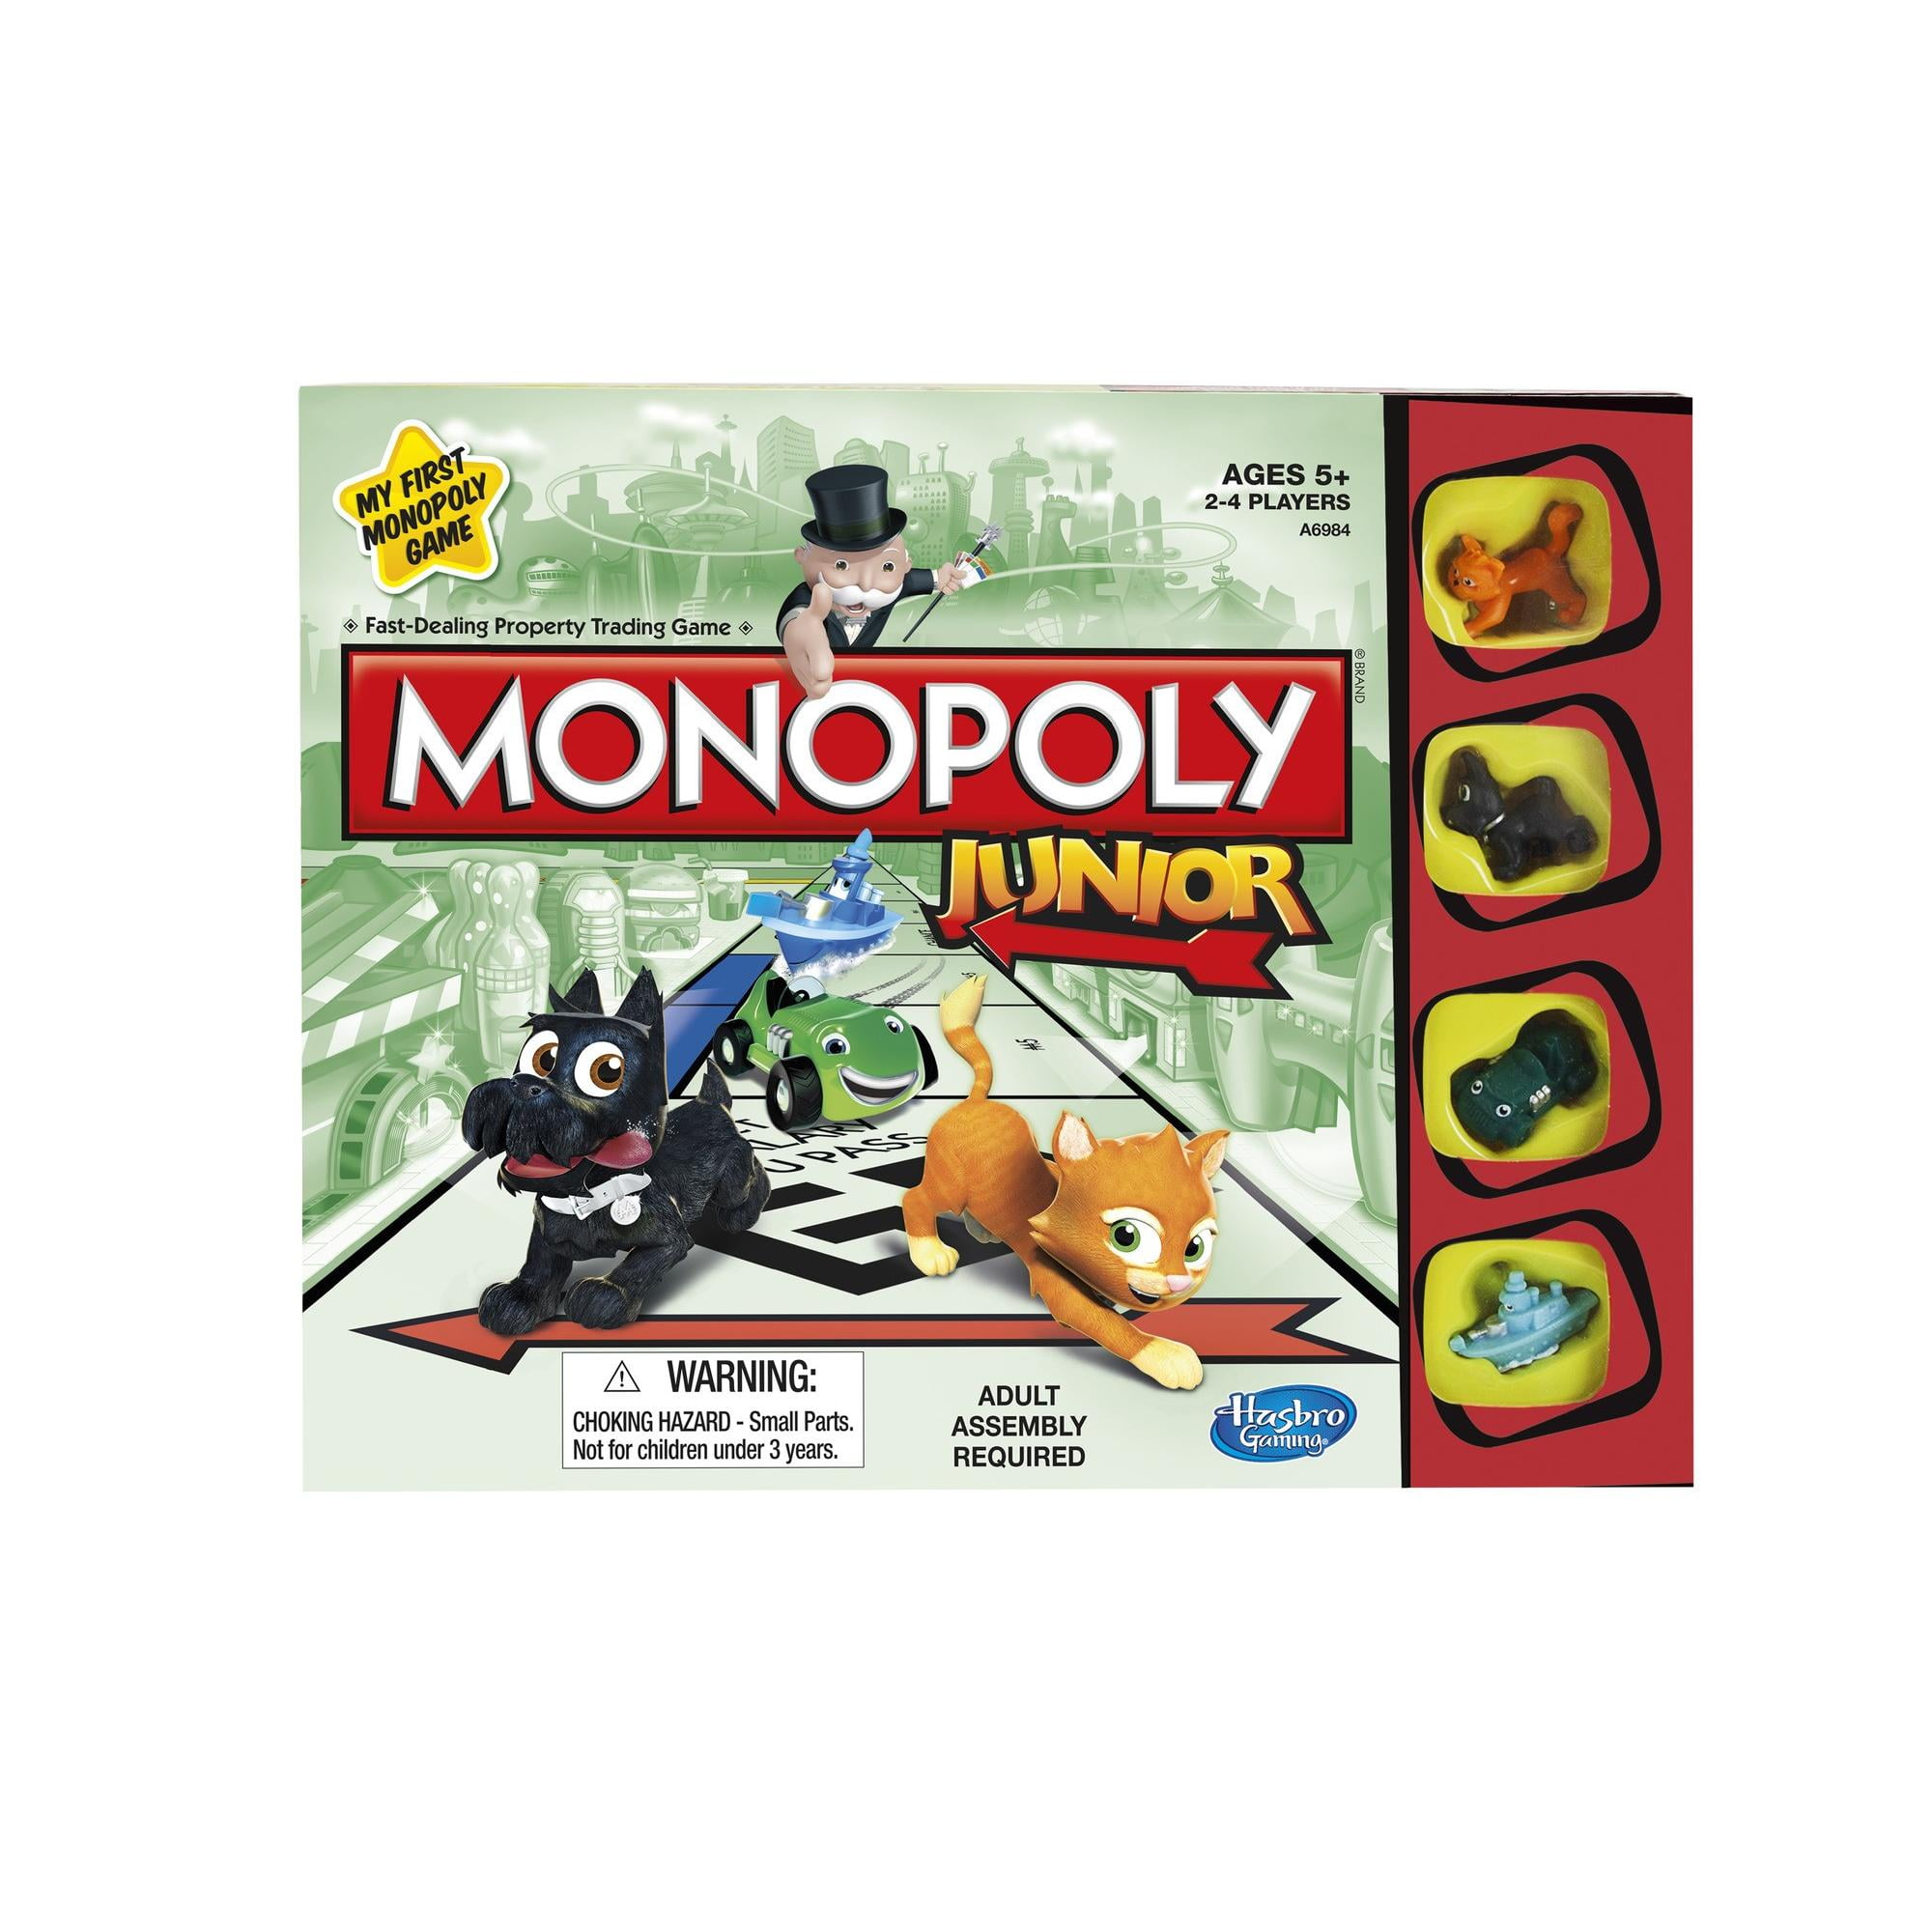 Monopoly House Divided Political Board Game Hasbro Z4 for sale online 